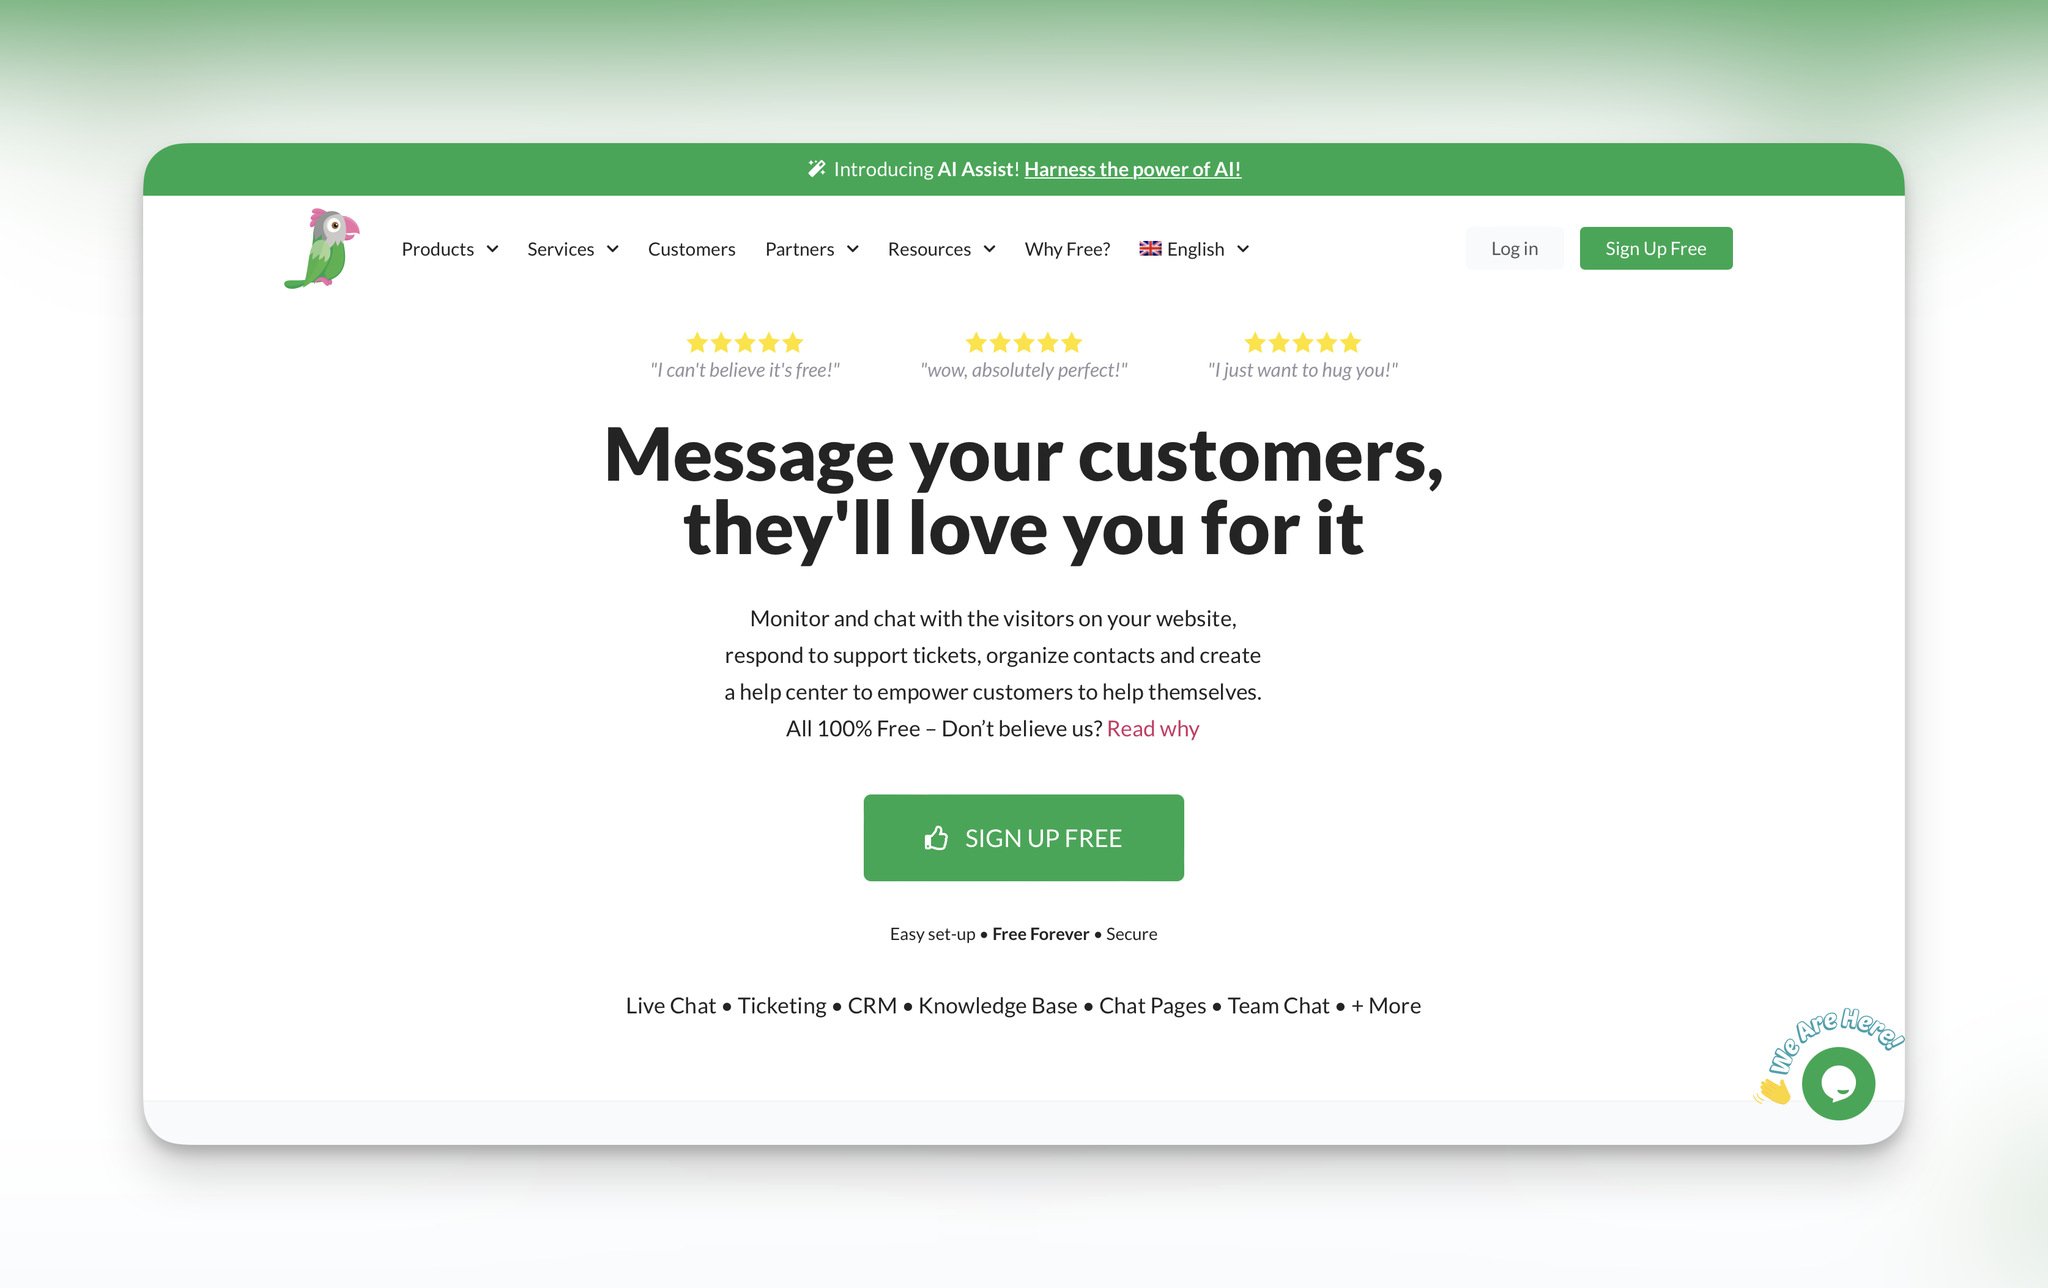 Tawk.to's homepage with the "Message your customers, they'll love your for it" headline in the center followed by a piece of text and a green "Sign up free" button below